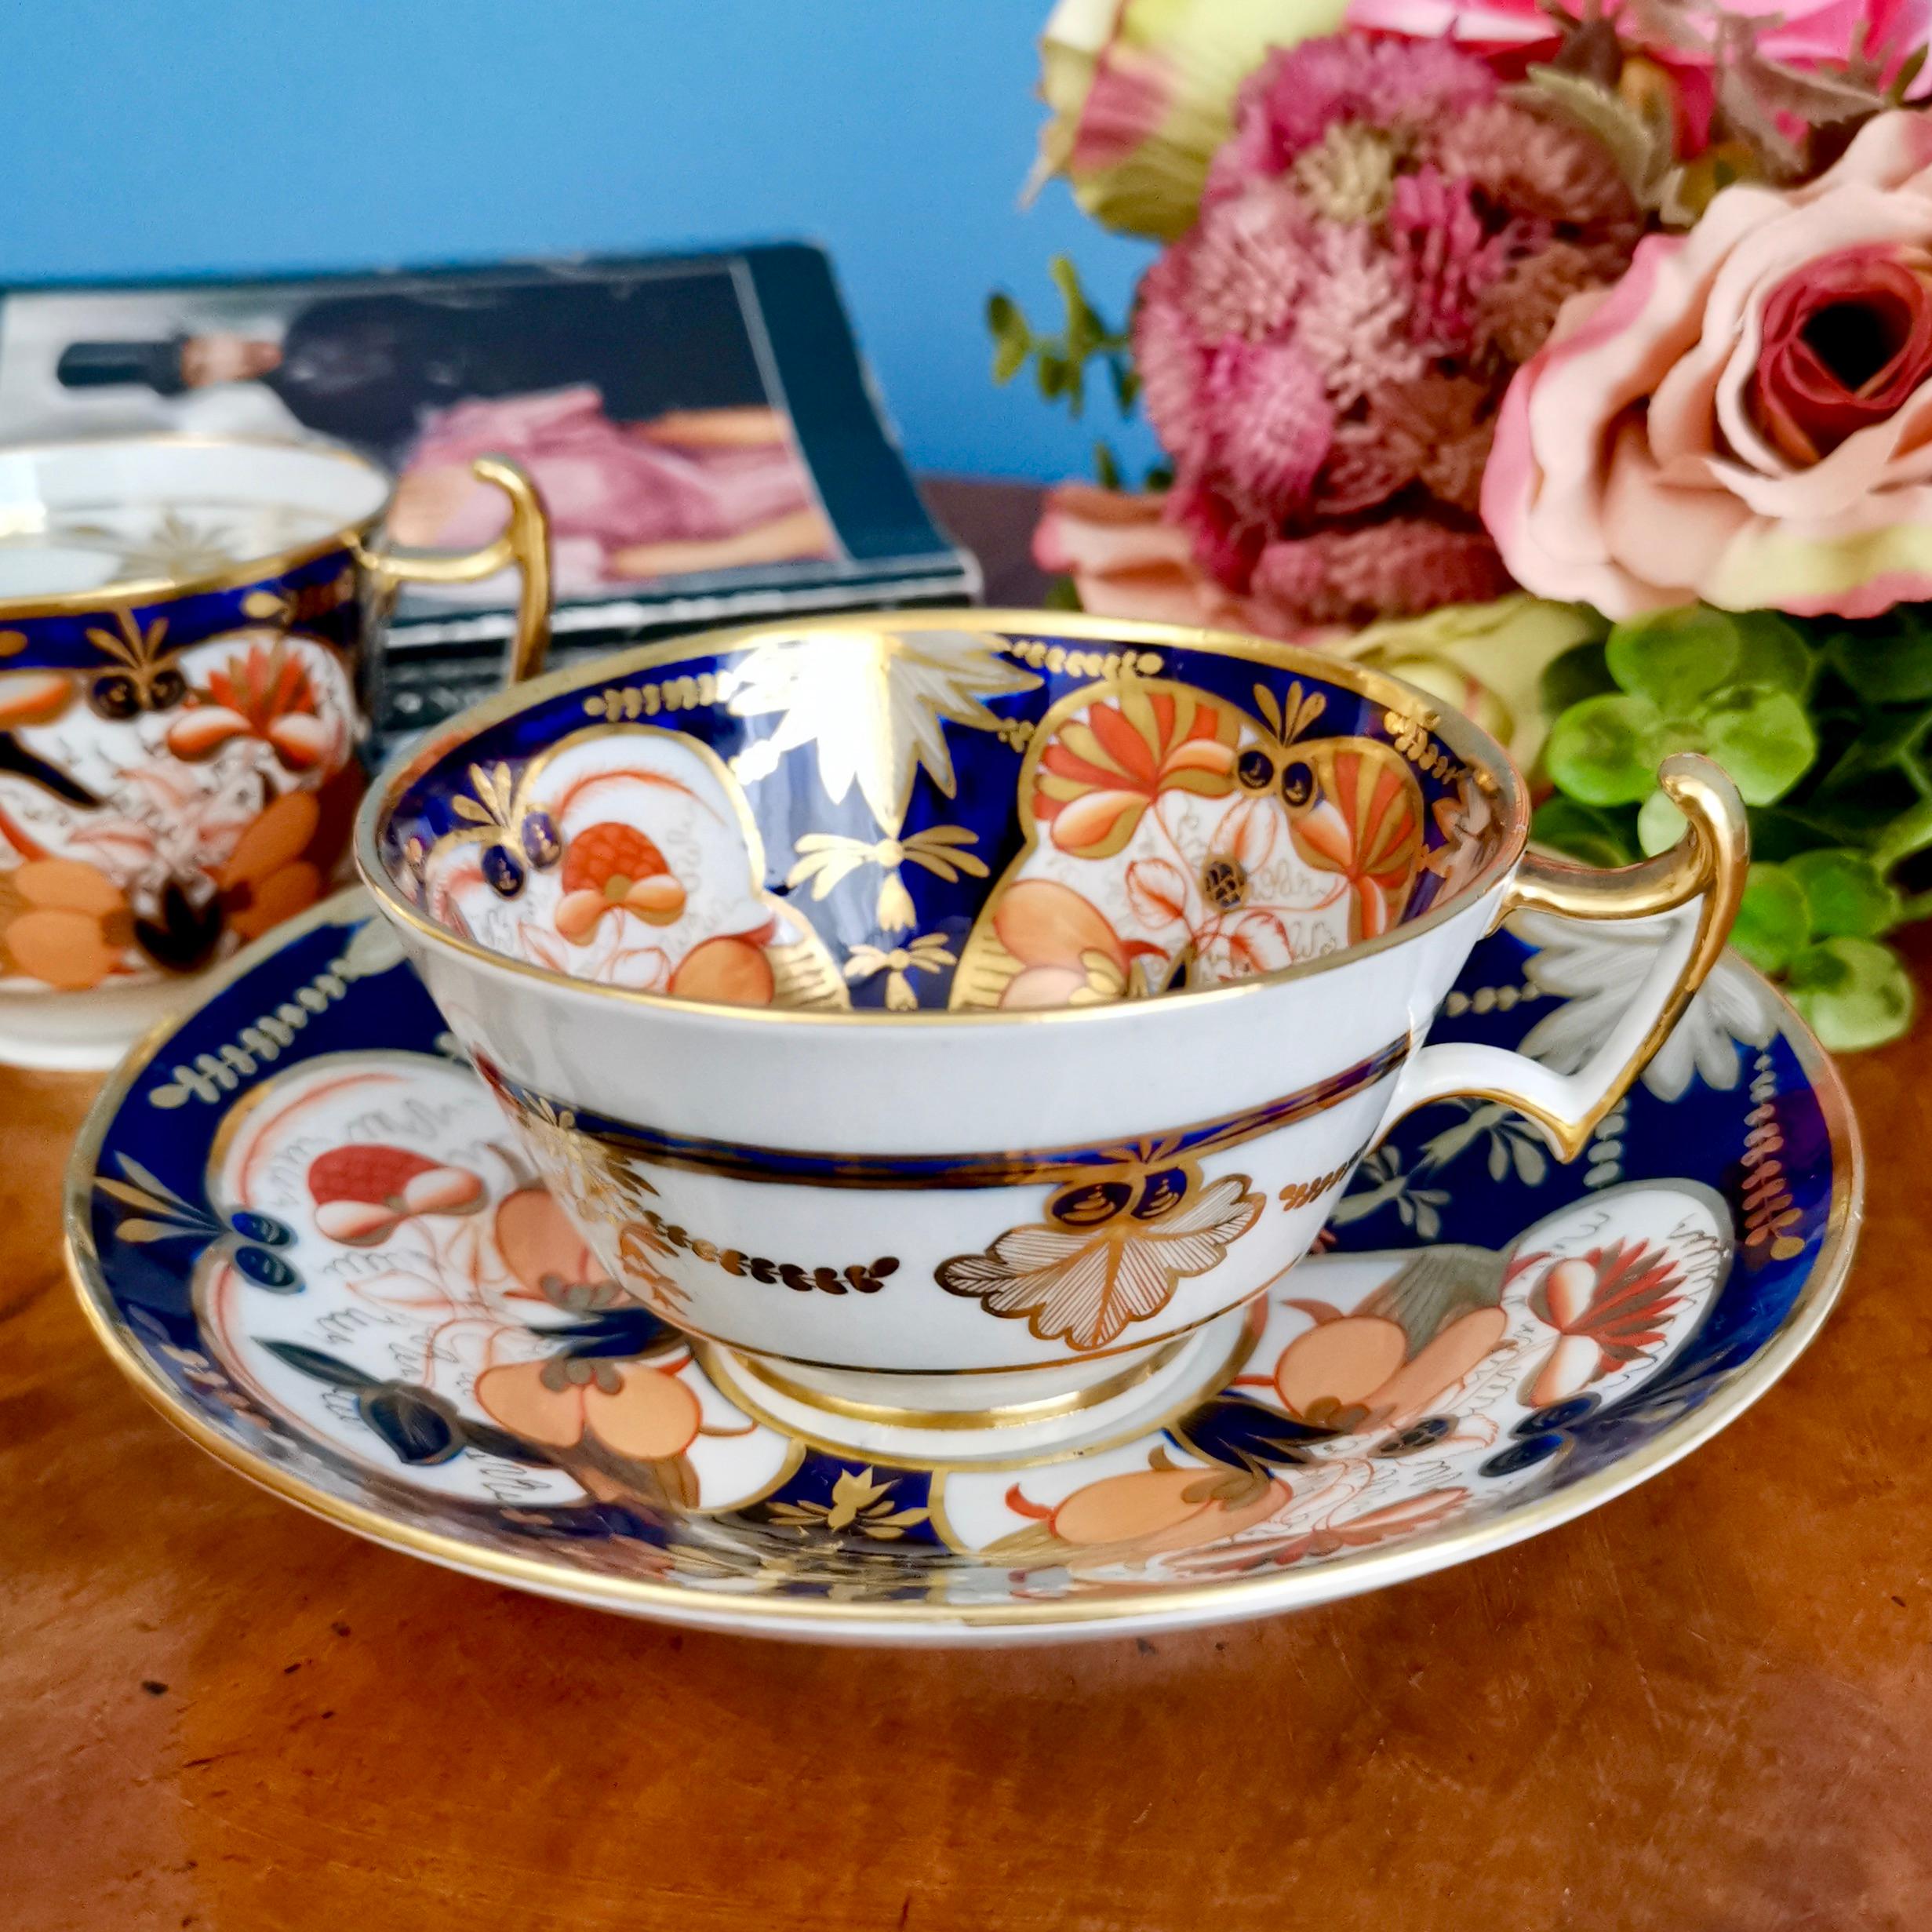 This is a beautiful teacup and saucer made by John Rose / Coalport in about 1815, which was the Regency era. The set is decorated with a stunning Imari pattern.

Coalport was one of the leading potters in 19th and 20th century, Staffordshire. They